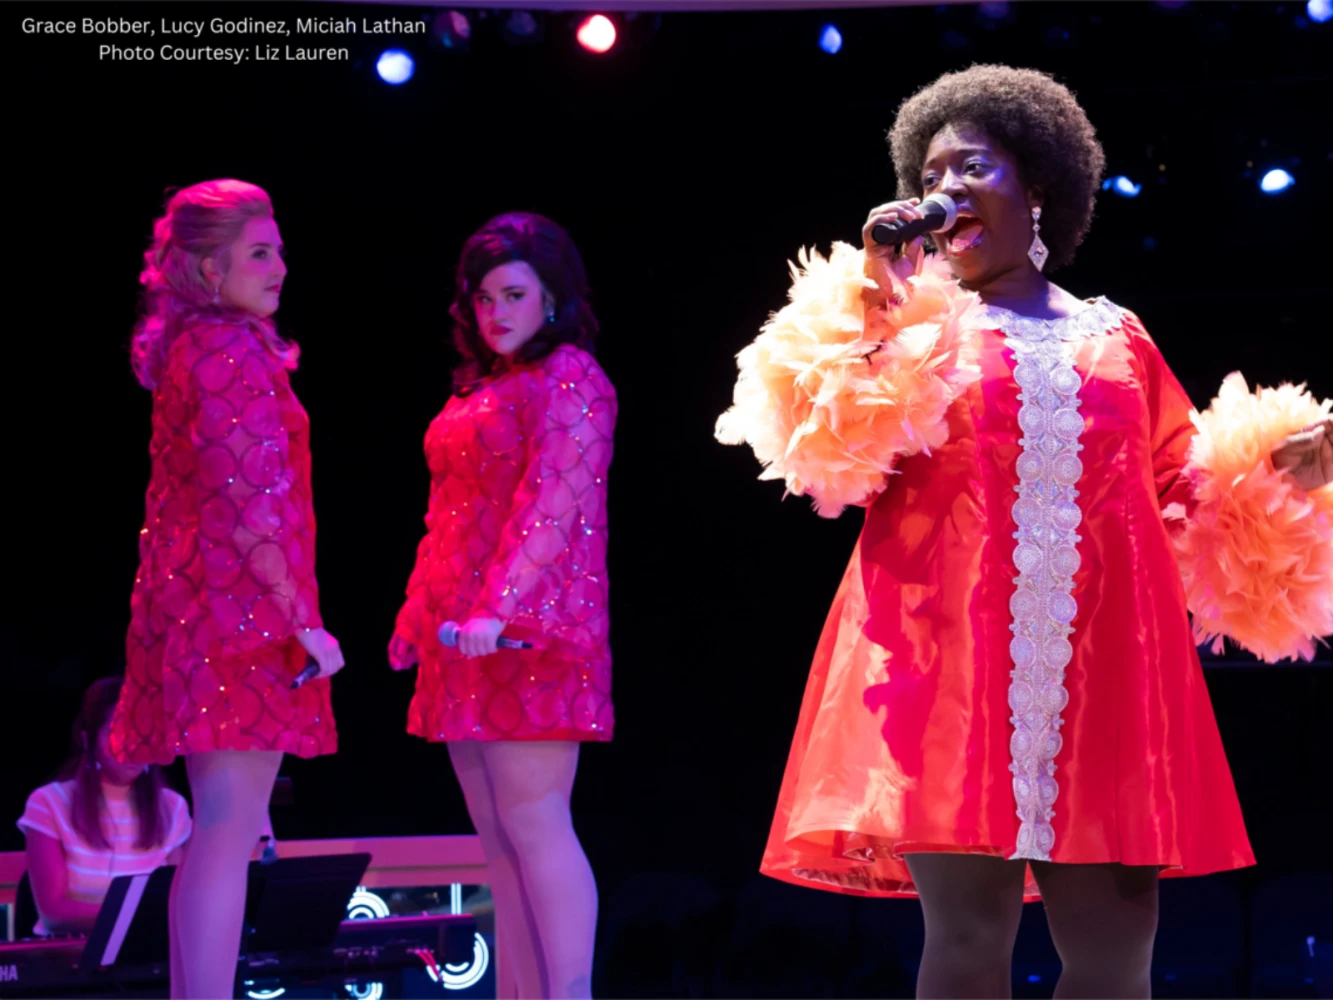 Beehive: The 60's Musical: What to expect - 5